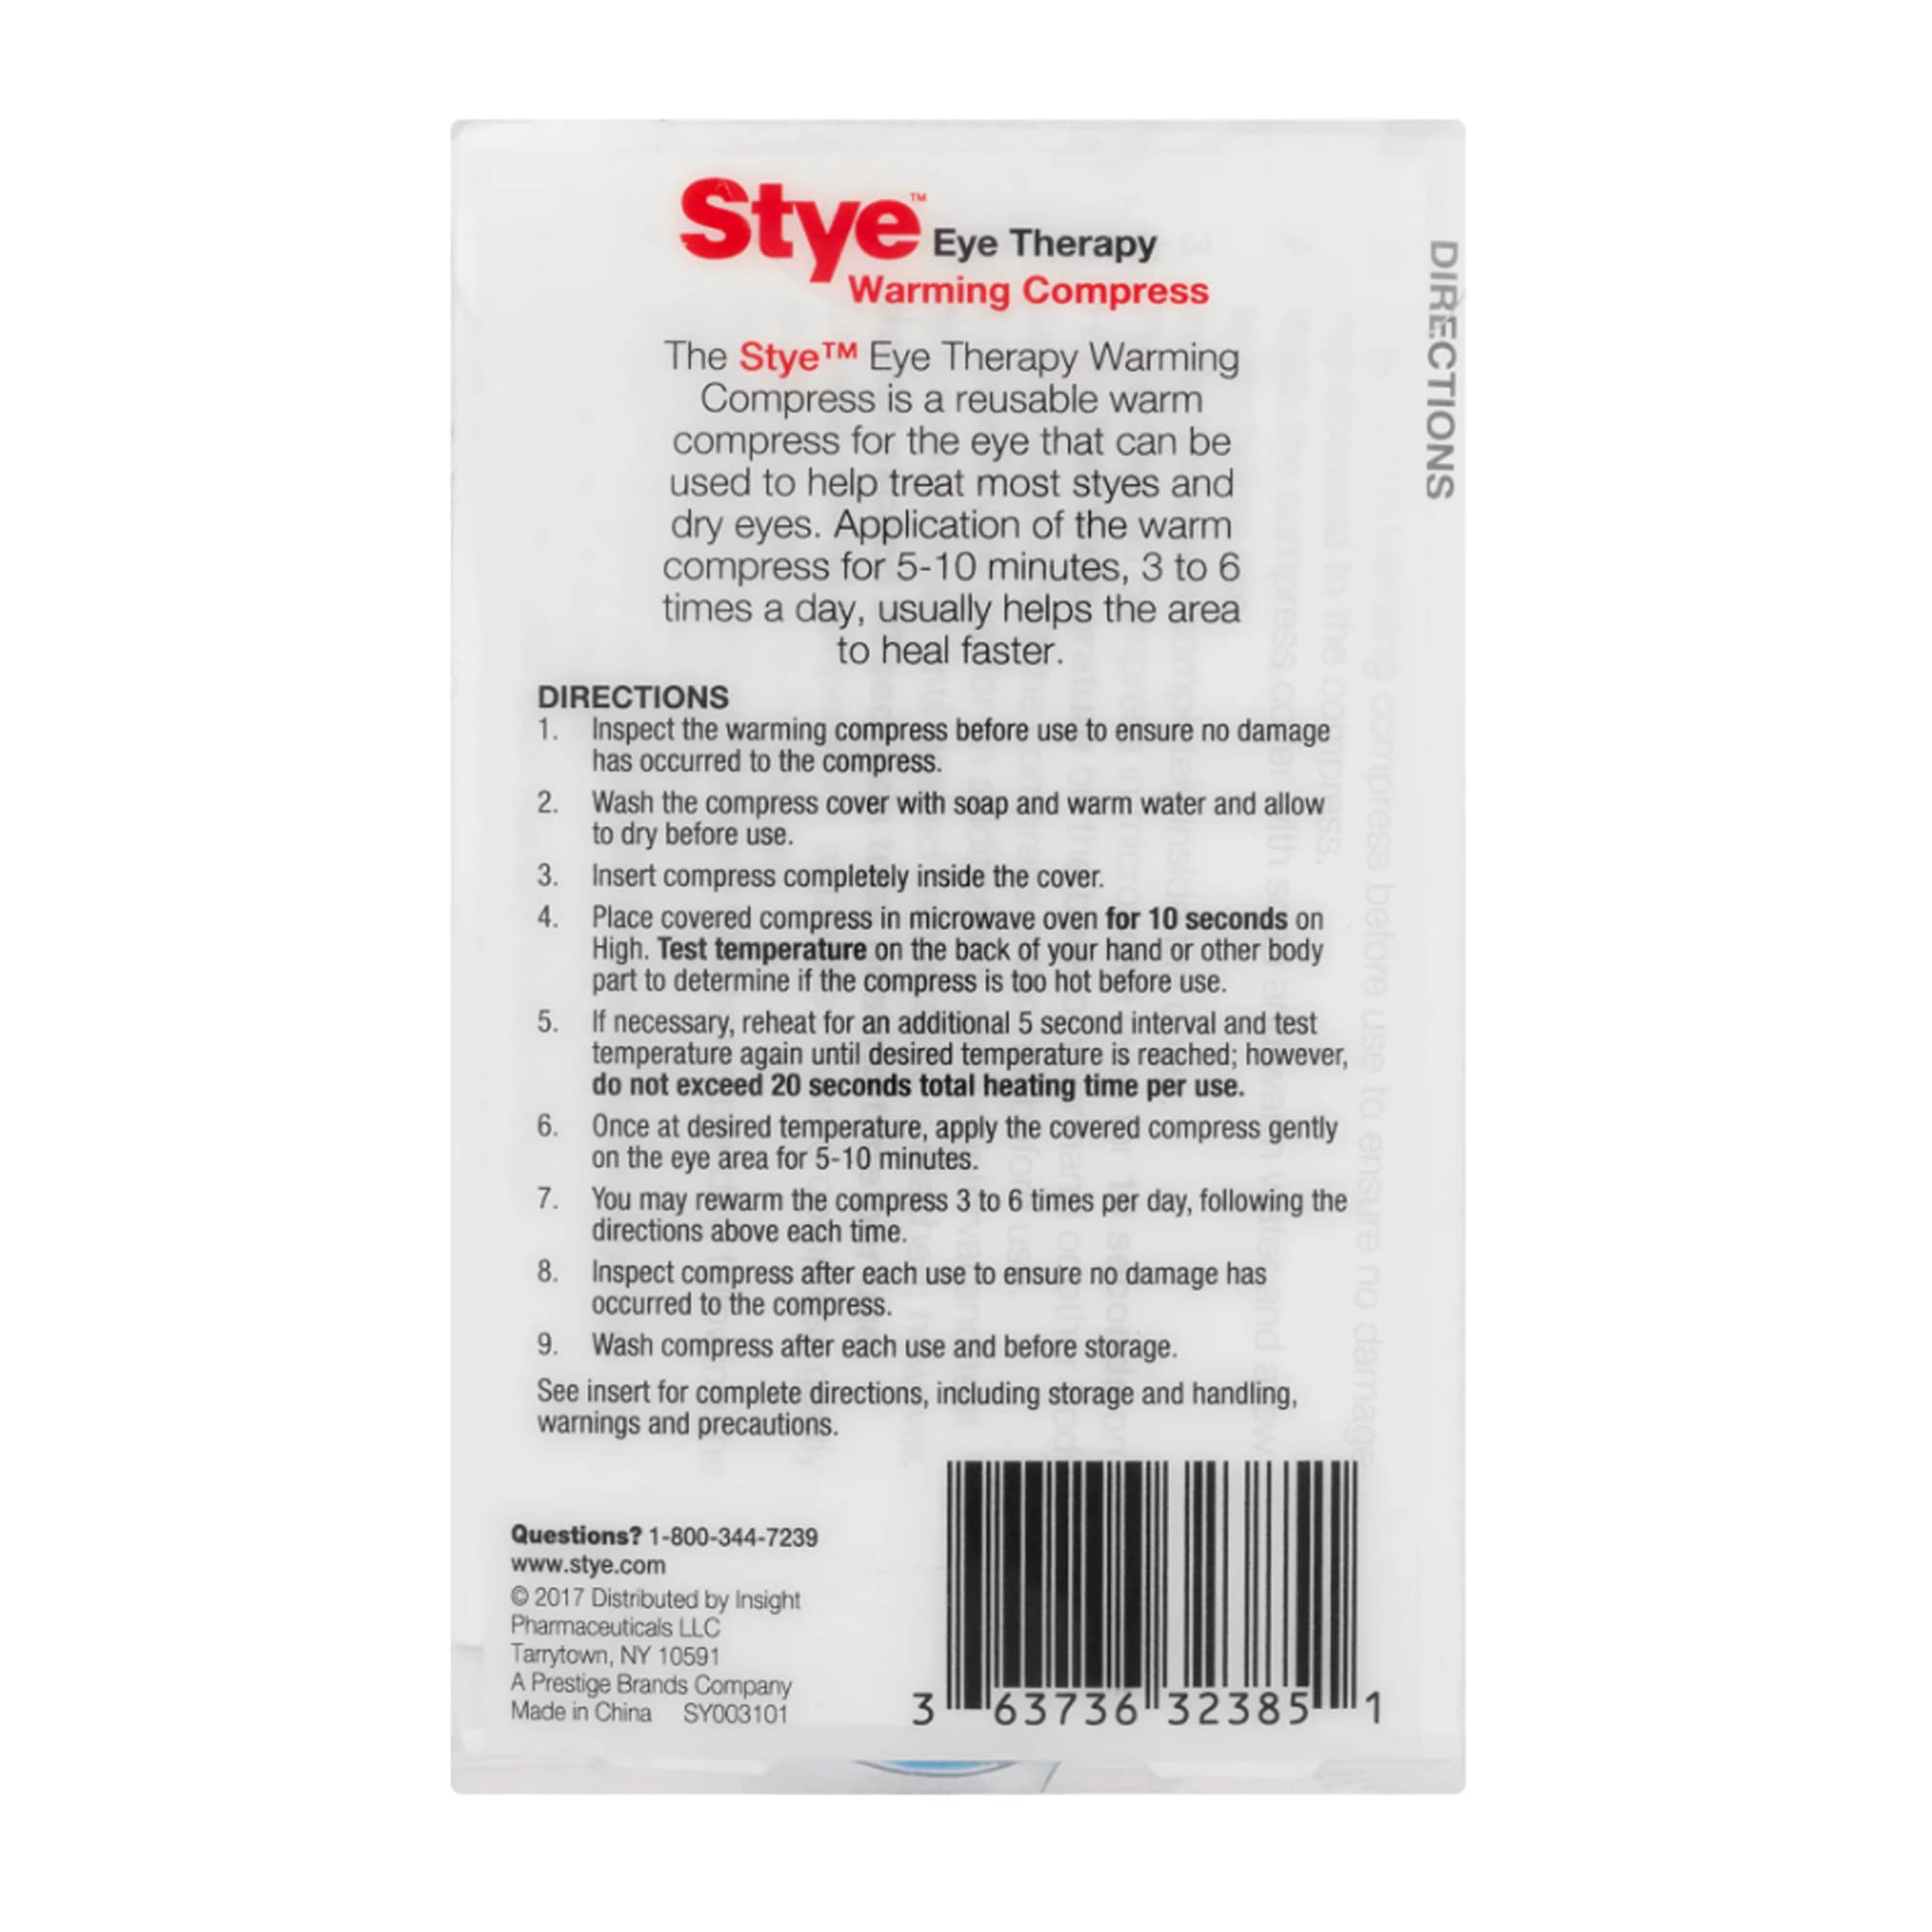 Stye Eye Therapy Reusable Warming Compress, Relief for Styes and Dry Eyes, Reusable